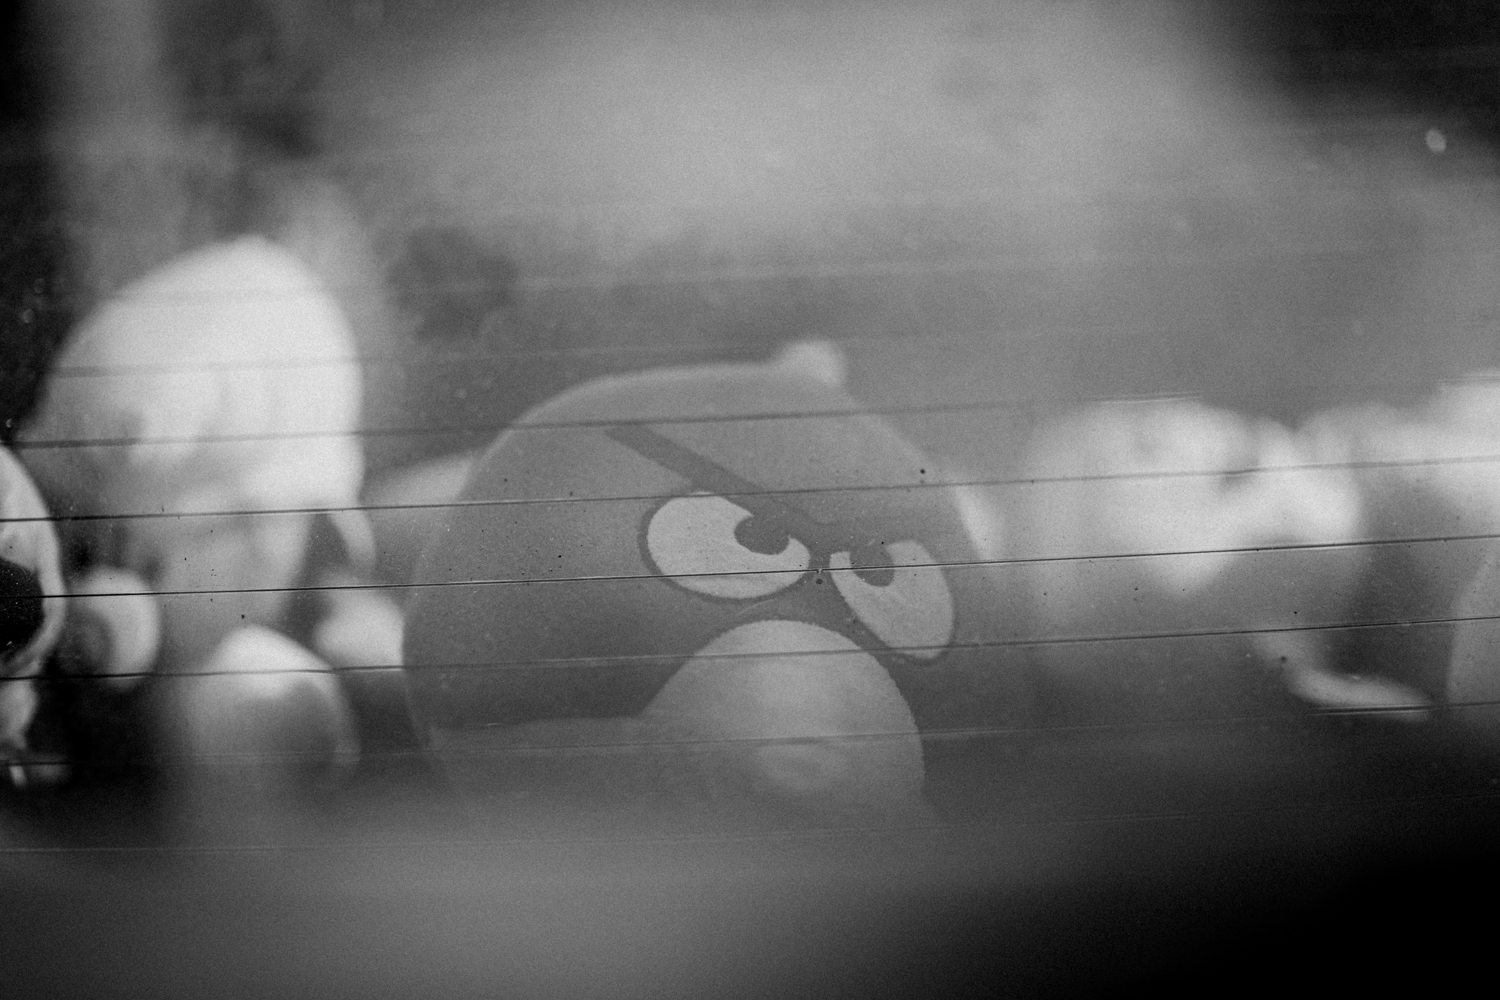 Dashboard toys in Malaysia are common, angry bird photo in black and white.